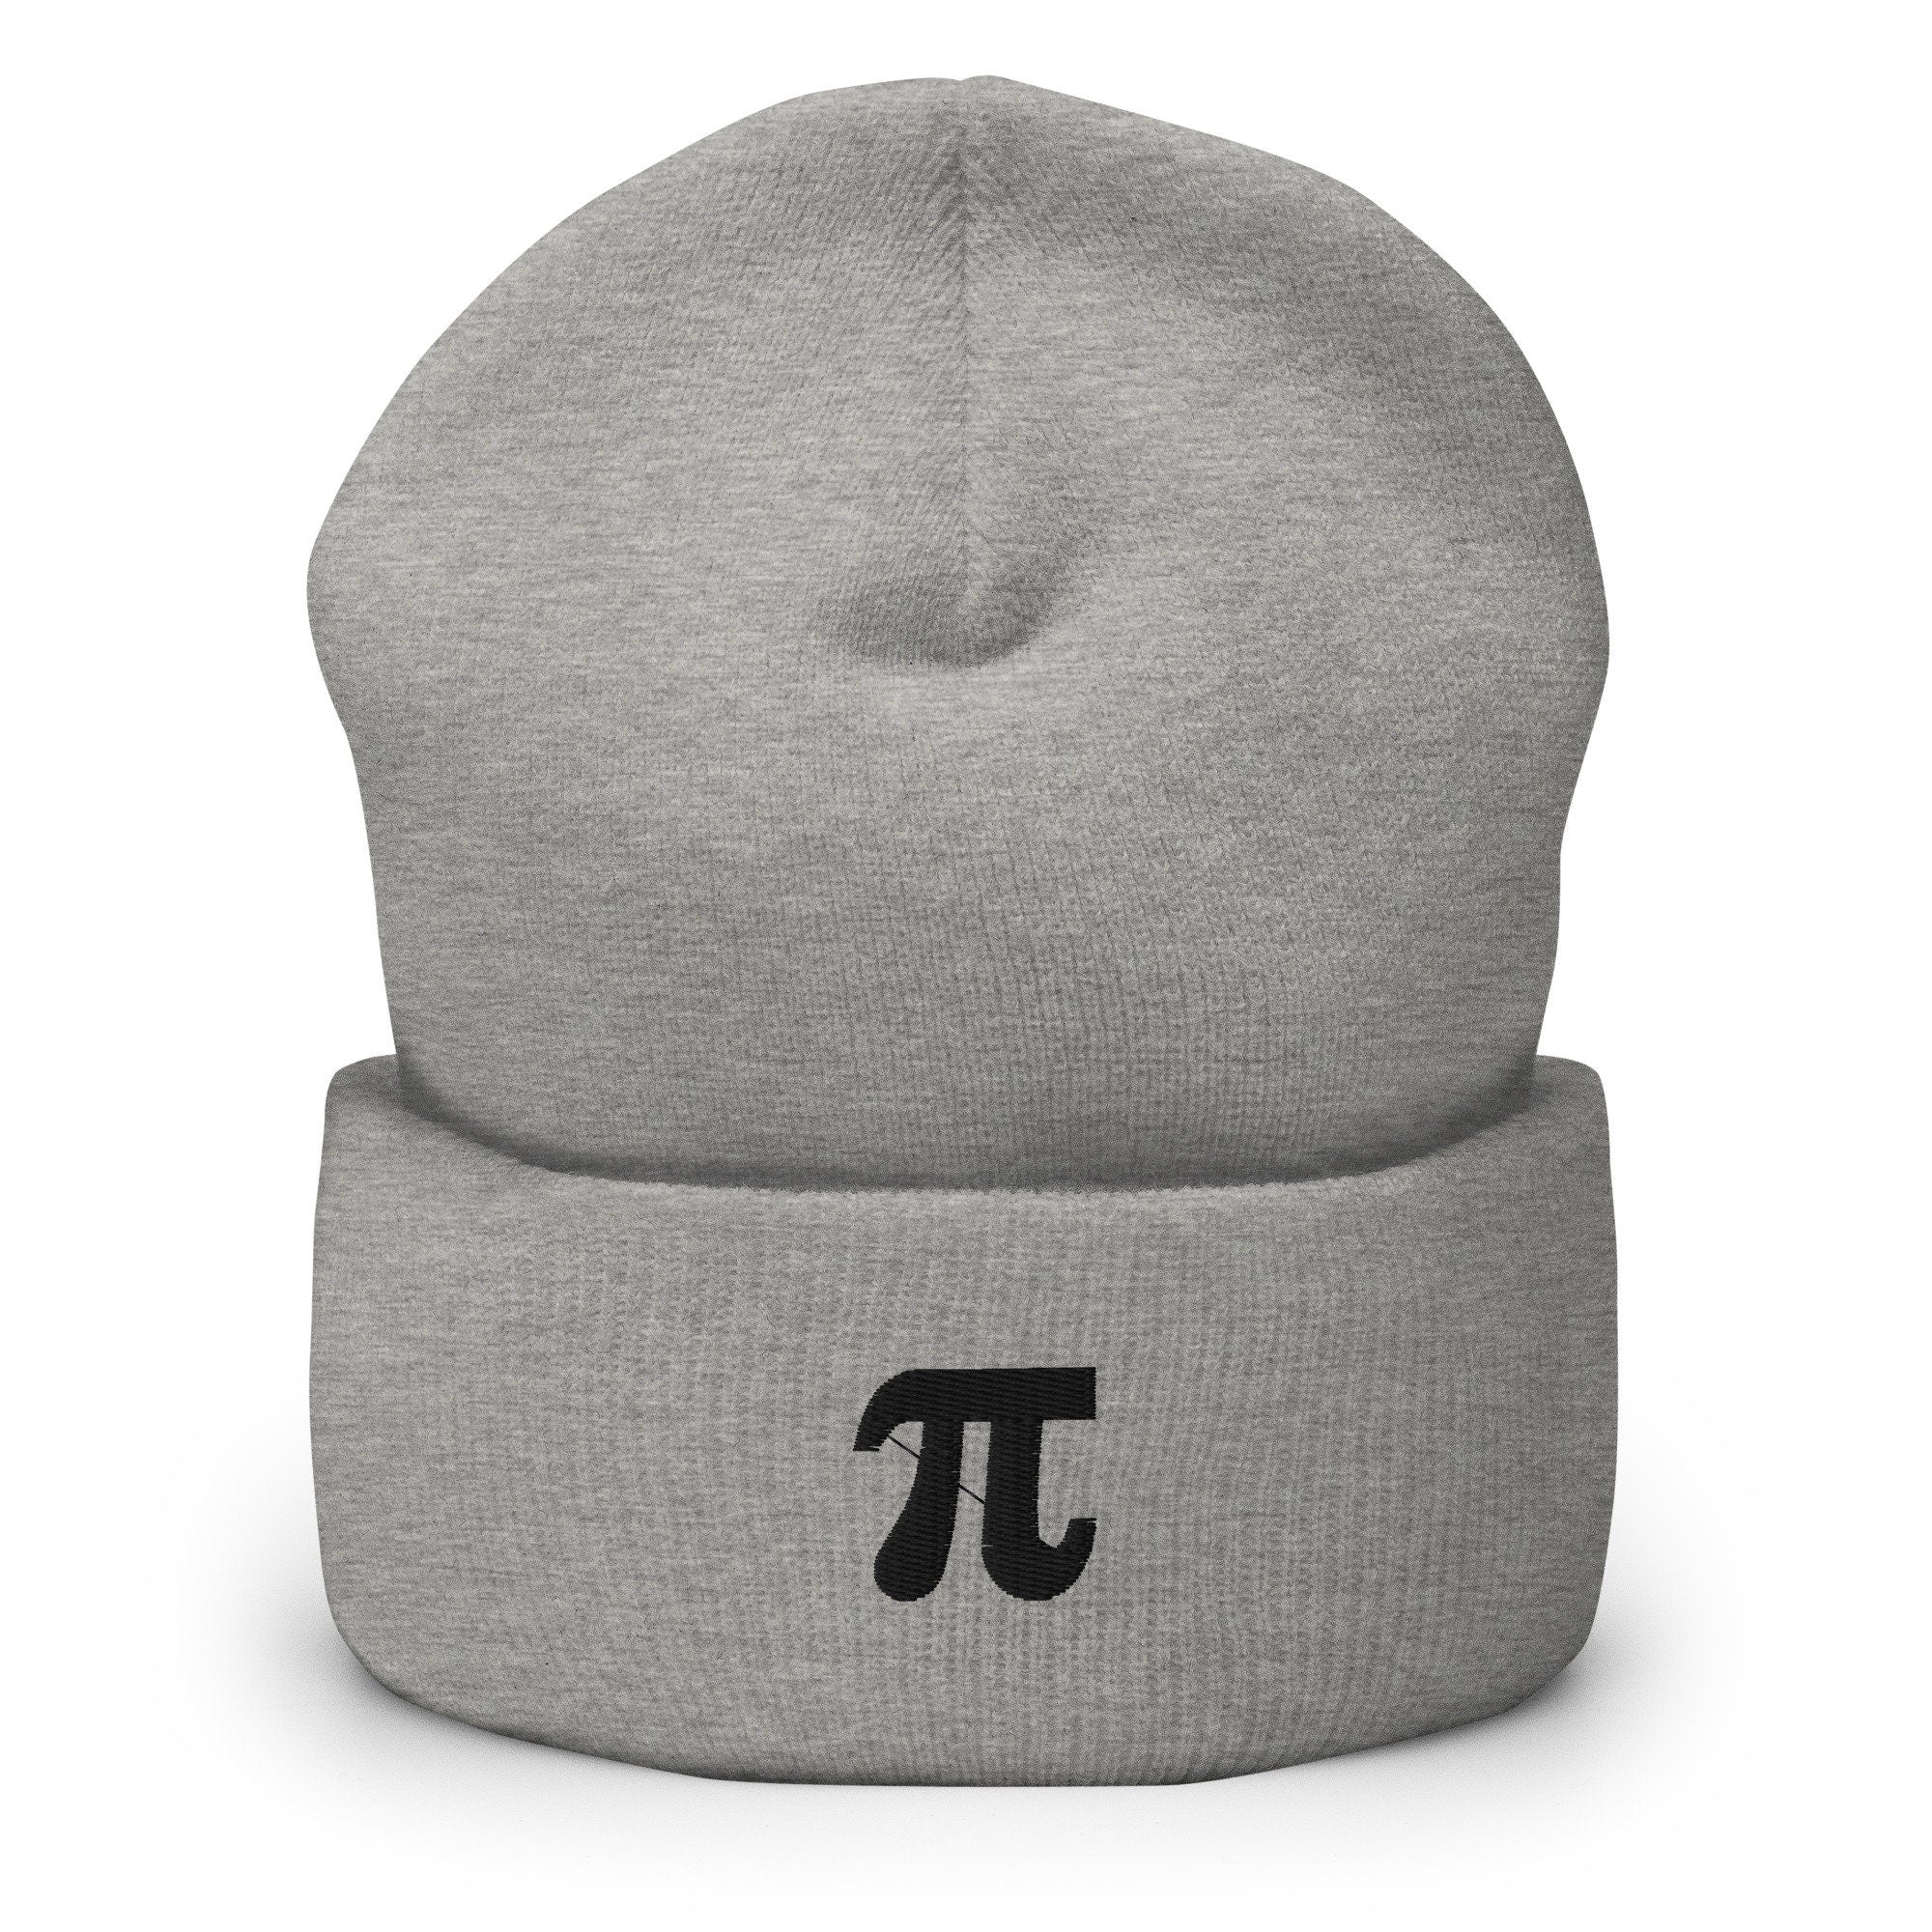 3.14 Pi Pie Day Math Pun Embroidered Beanie, Handmade Cuffed Knit Unisex Slouchy Adult Winter Hat Cap Gift